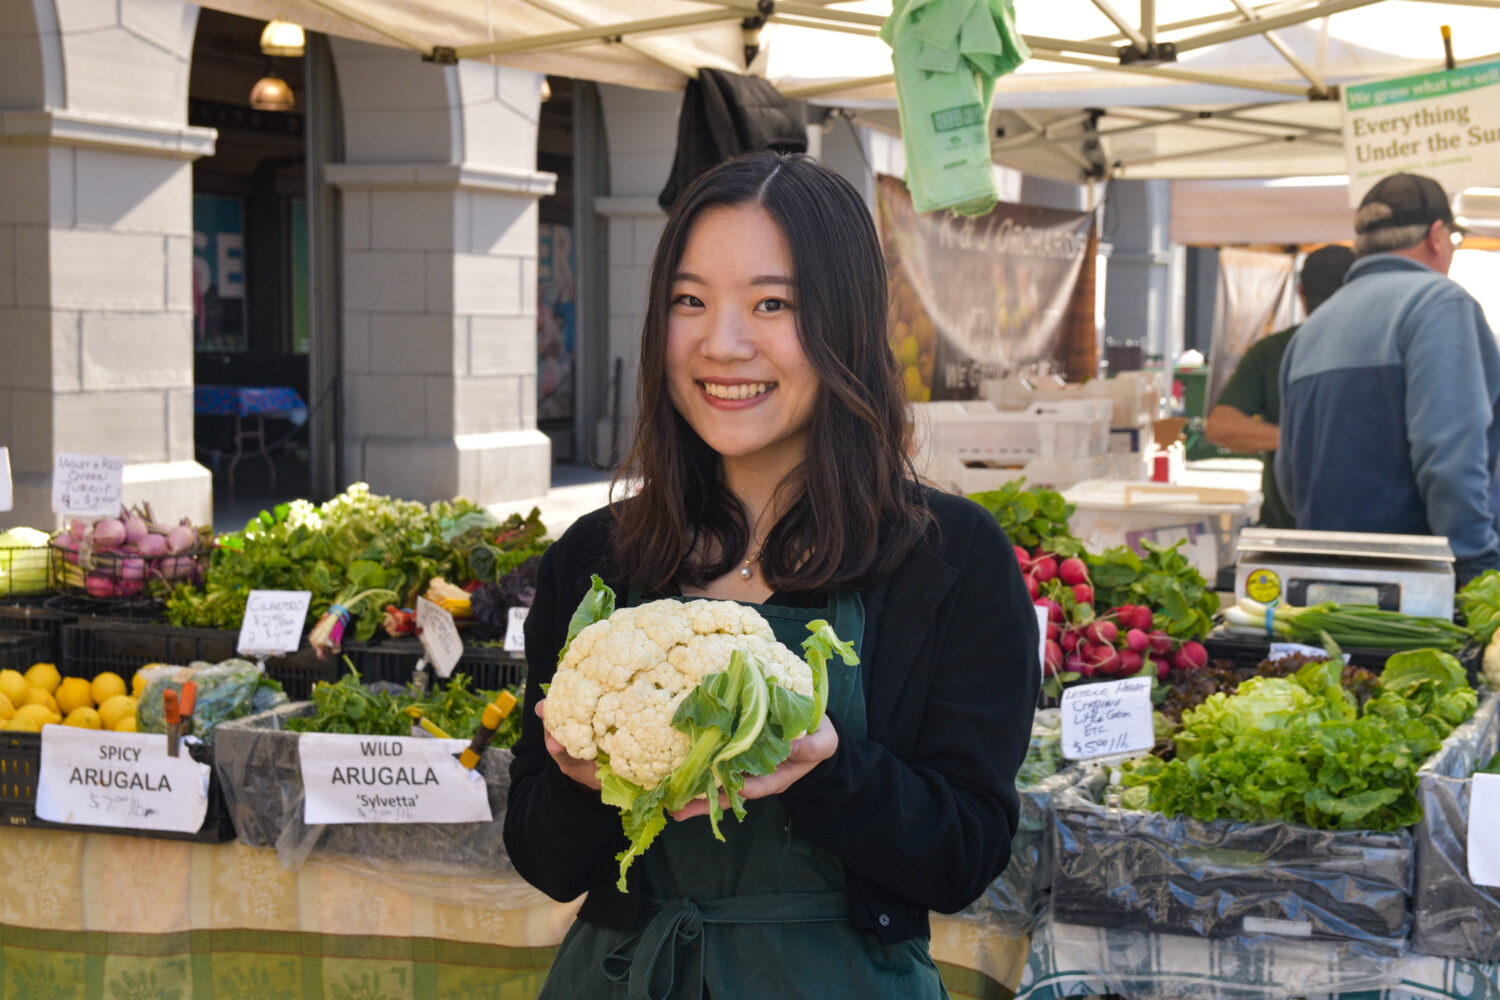 Yuki Tatsumi poses with a cauliflower at Foodwise's Ferry Plaza Farmers Market in San Francisco.